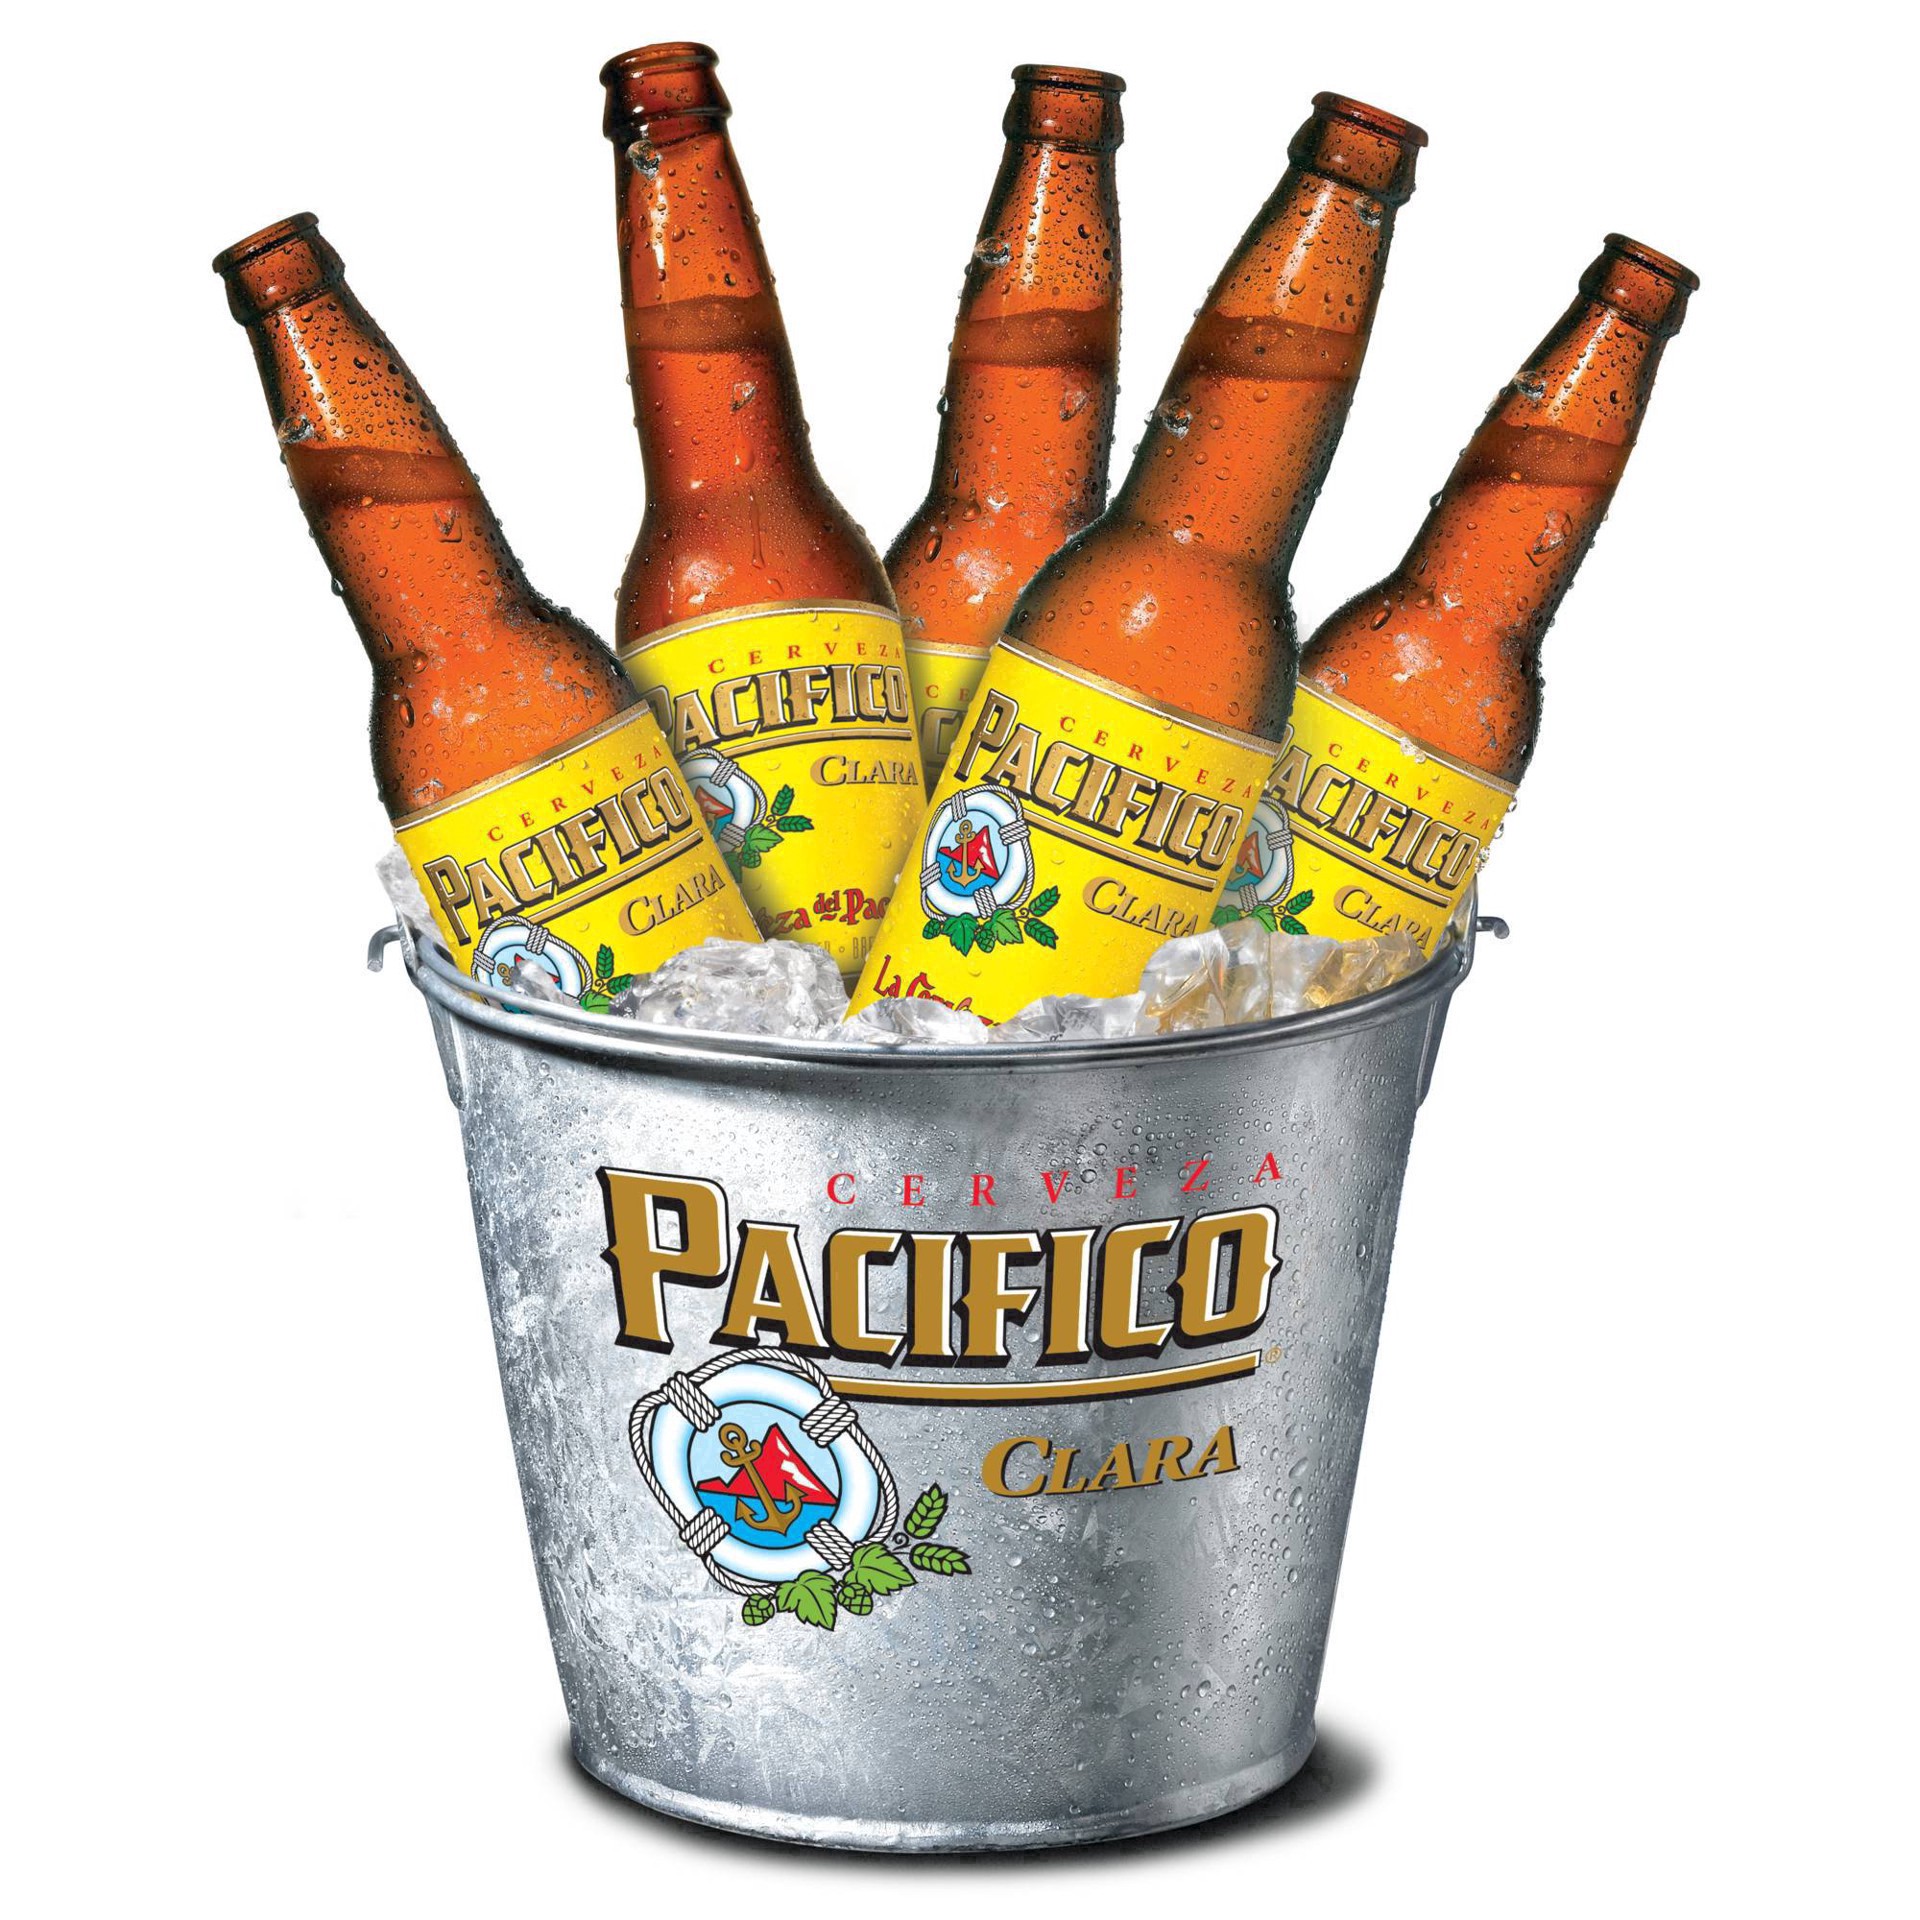 slide 69 of 79, Pacifico Clara Lager Mexican Beer Bottles, 12 ct; 12 oz